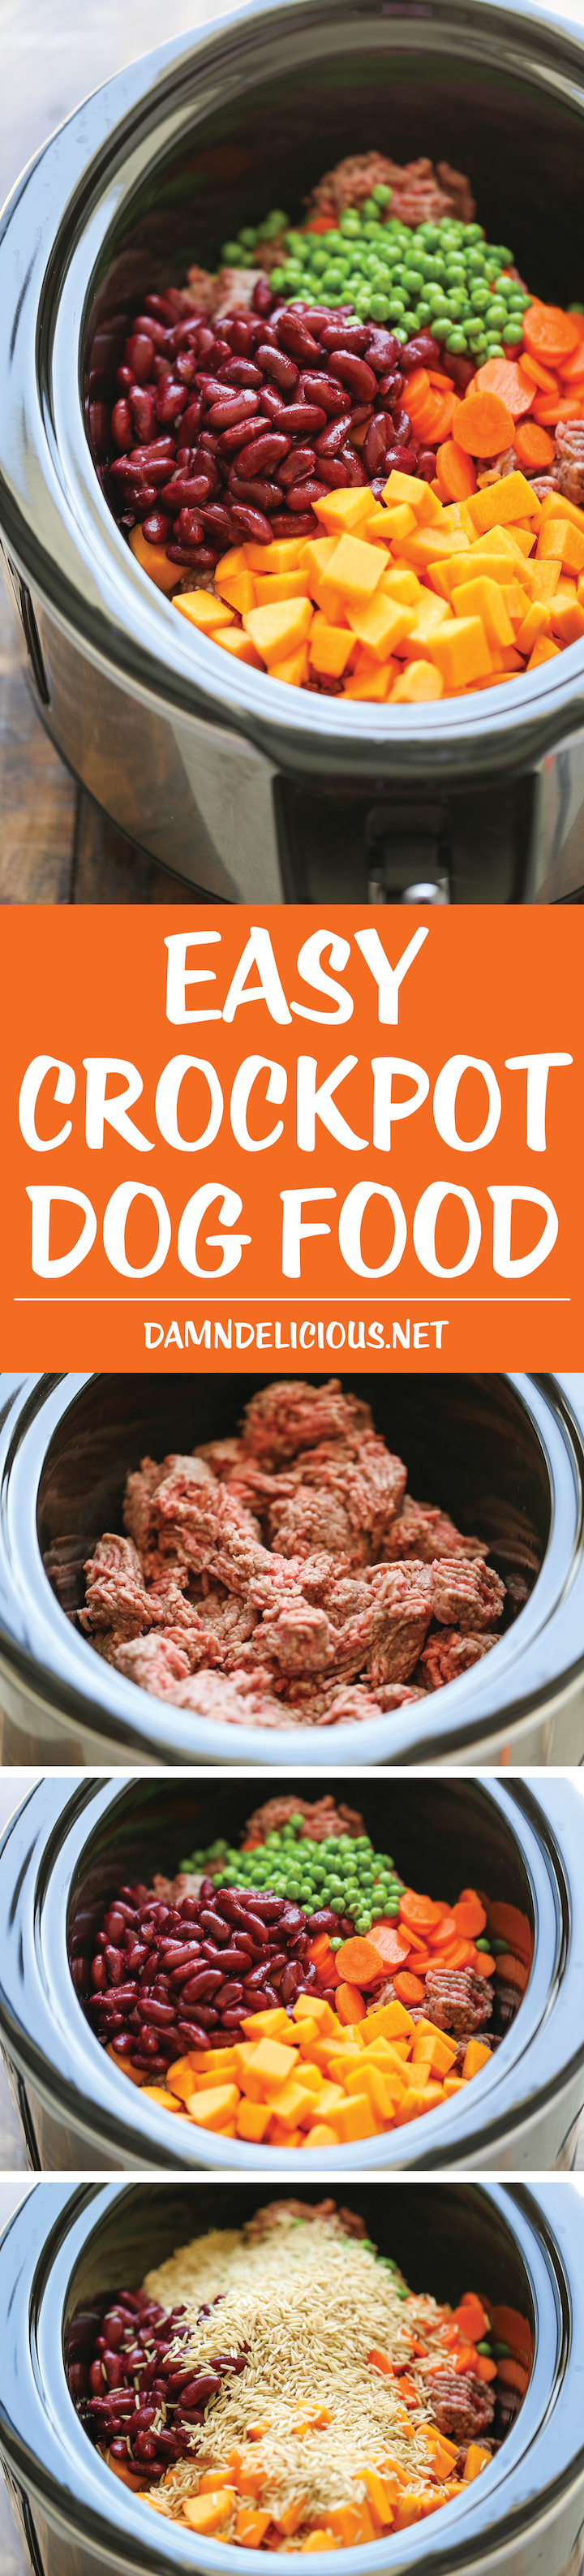 Easy Crockpot Dog Food - DIY dog food can easily be made right in the slow cooker. It's healthier and cheaper than store-bought, and it's freezer-friendly!